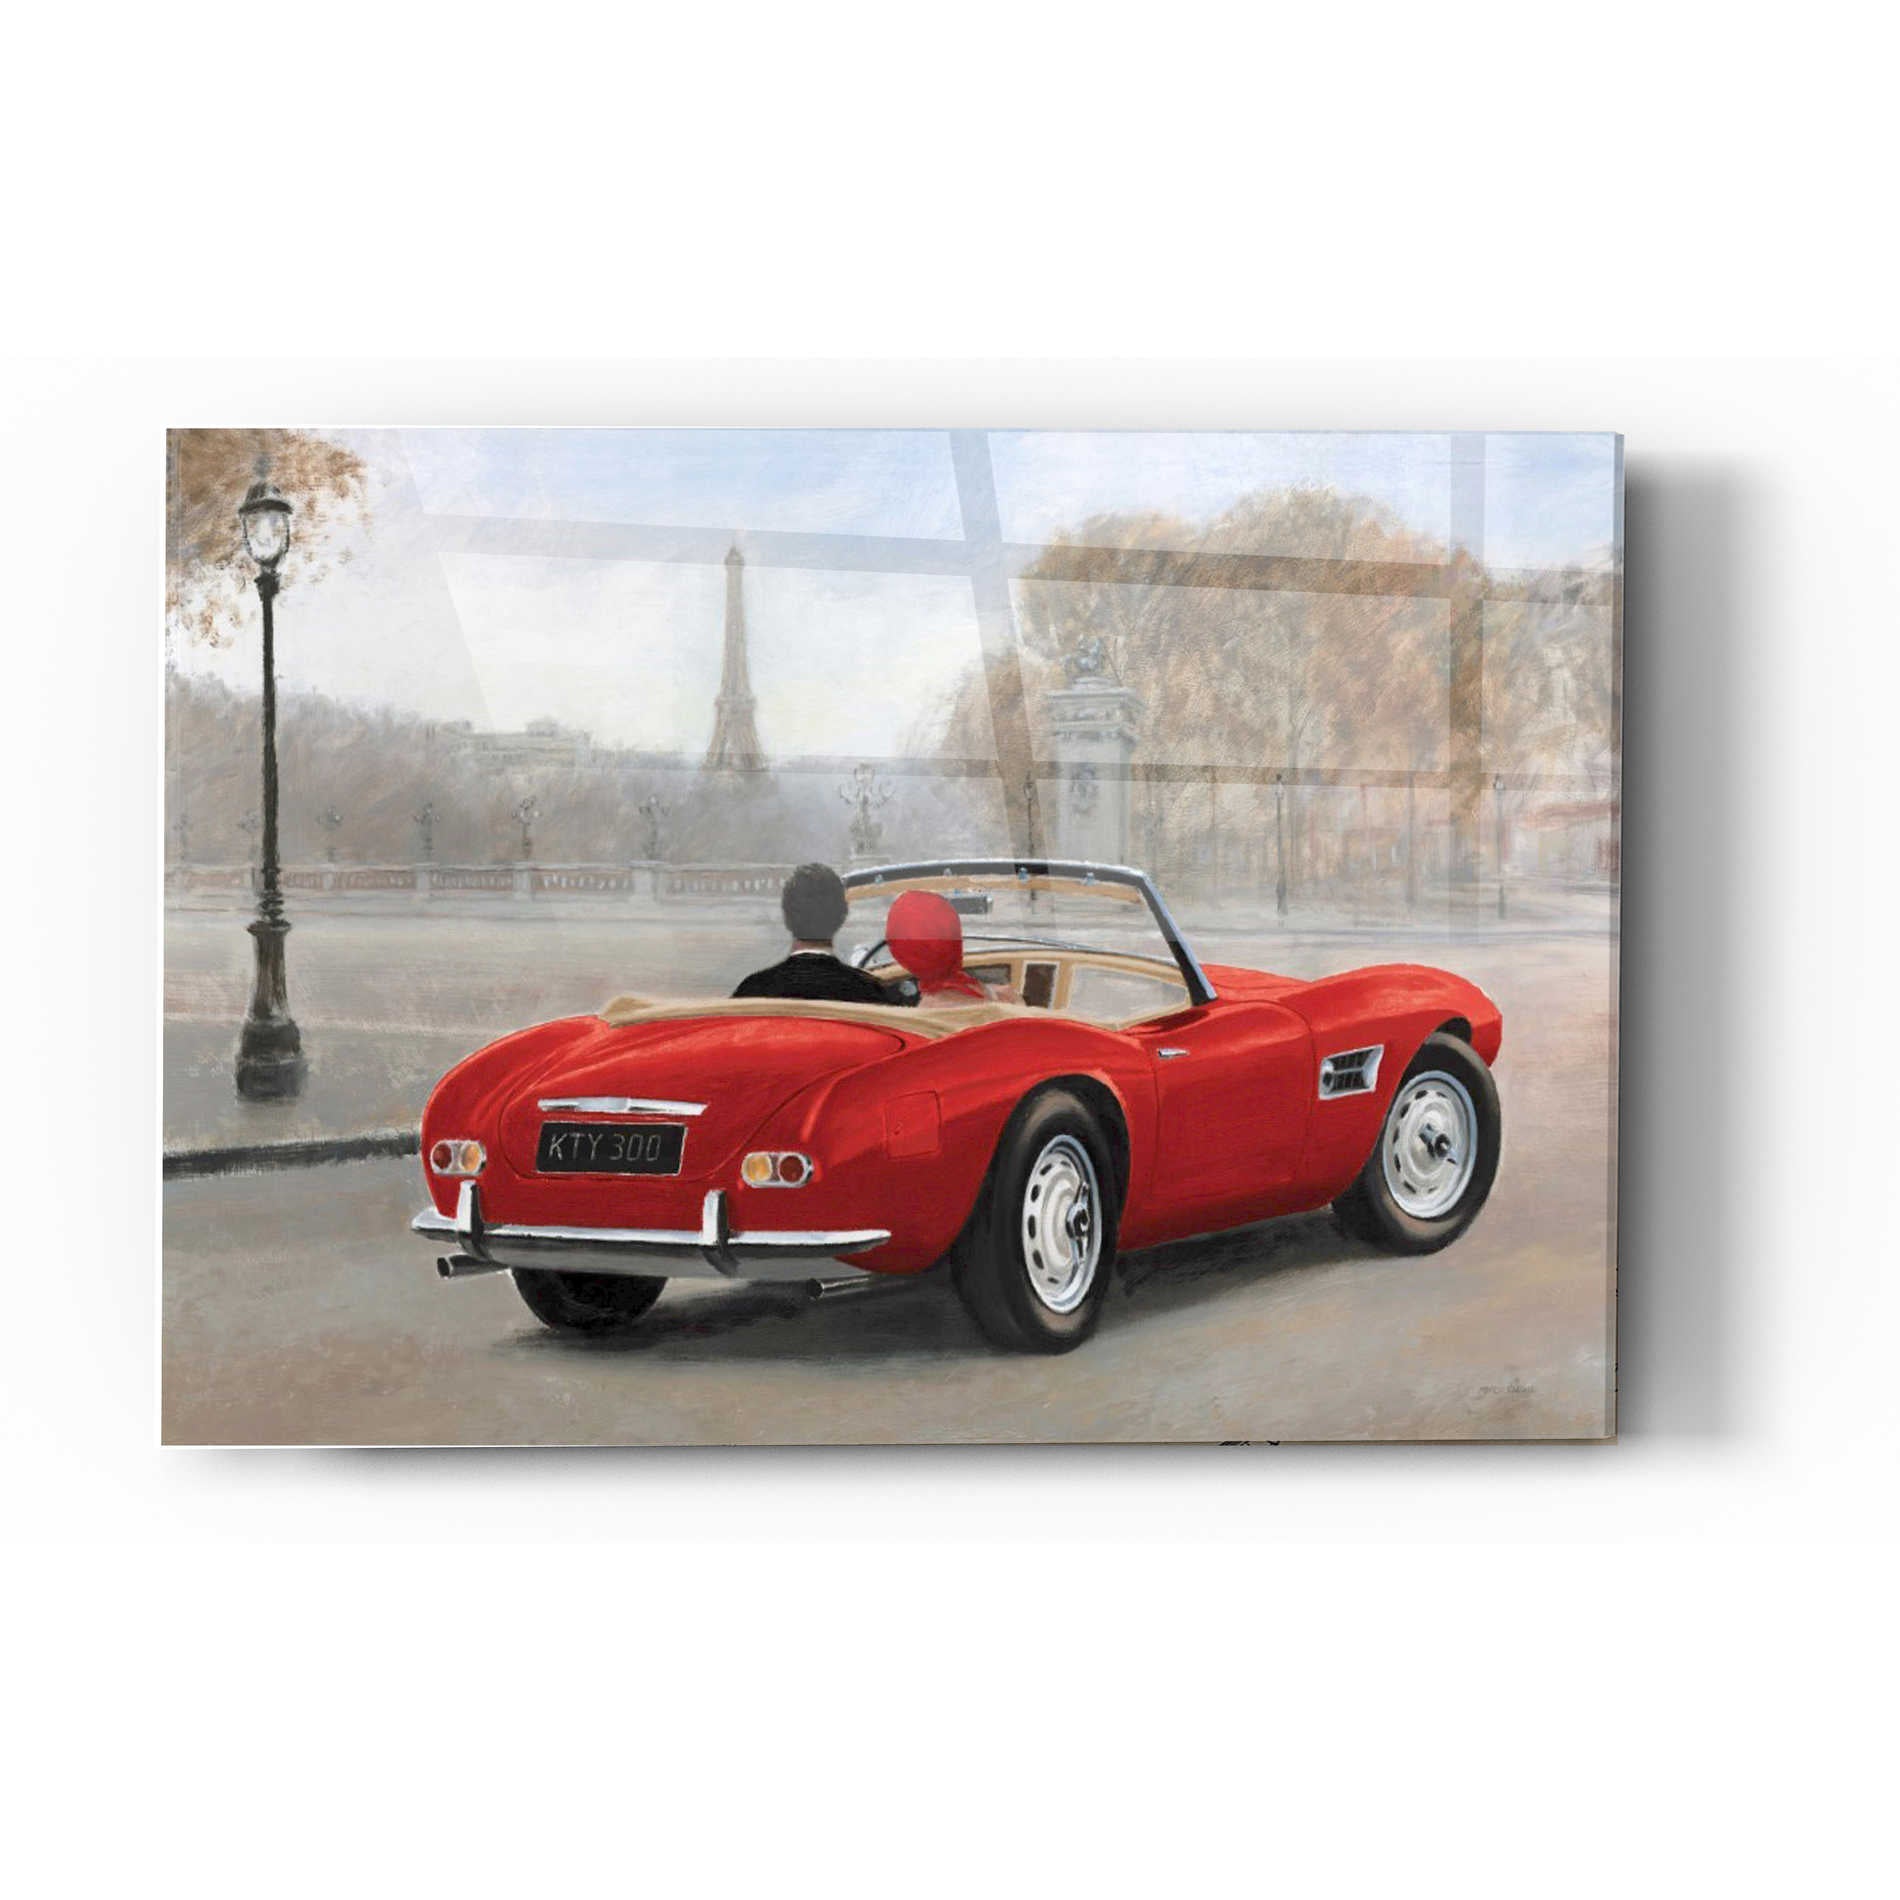 Epic Art 'A Ride in Paris III Red Car' by Marco Fabiano, Acrylic Glass Wall Art